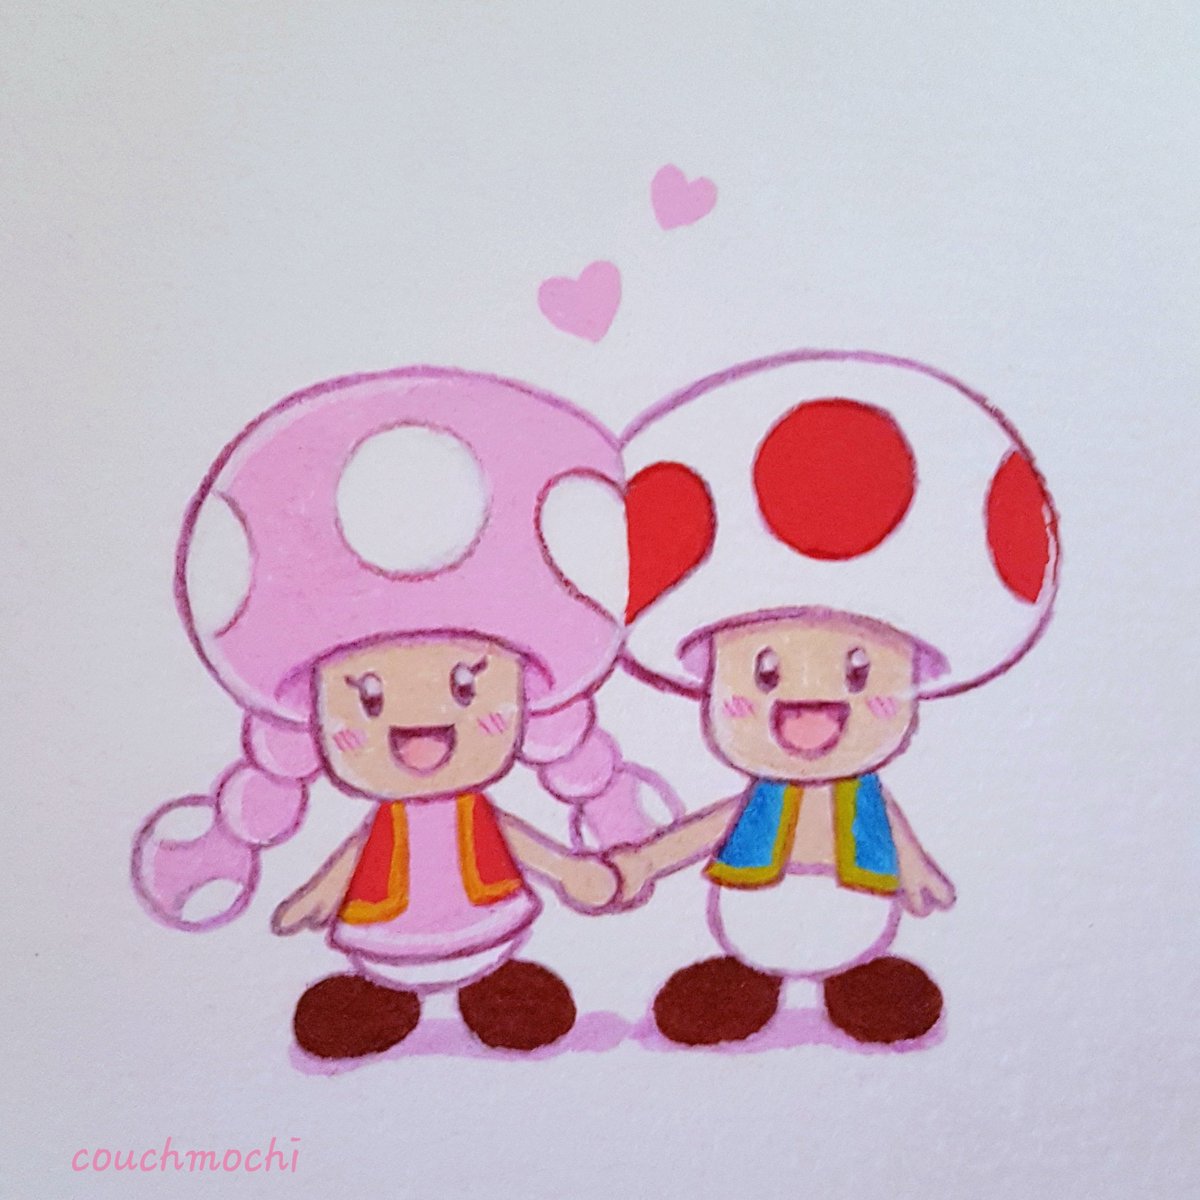 Tosh Did These For My Boyfriend S Valentine S Card Toad Toadette Cute キノピオ キノピコ かわいい T Co Wvgdajkbbx Twitter